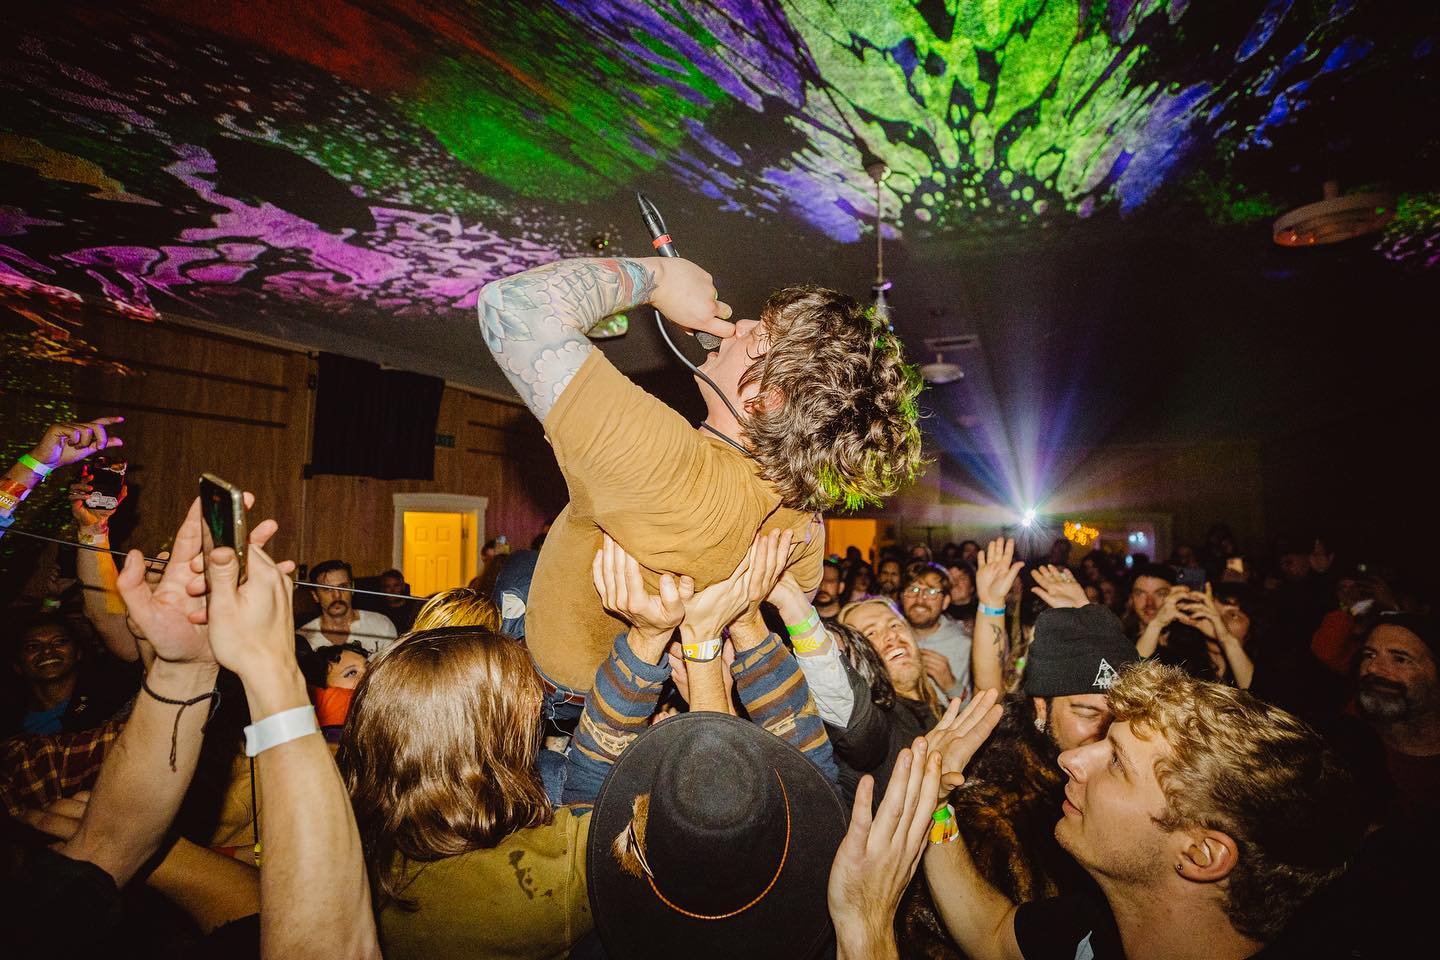 The singer from the band Monsterwatch crowdsurfs during Freakout Festival in a psychedilic-lit room